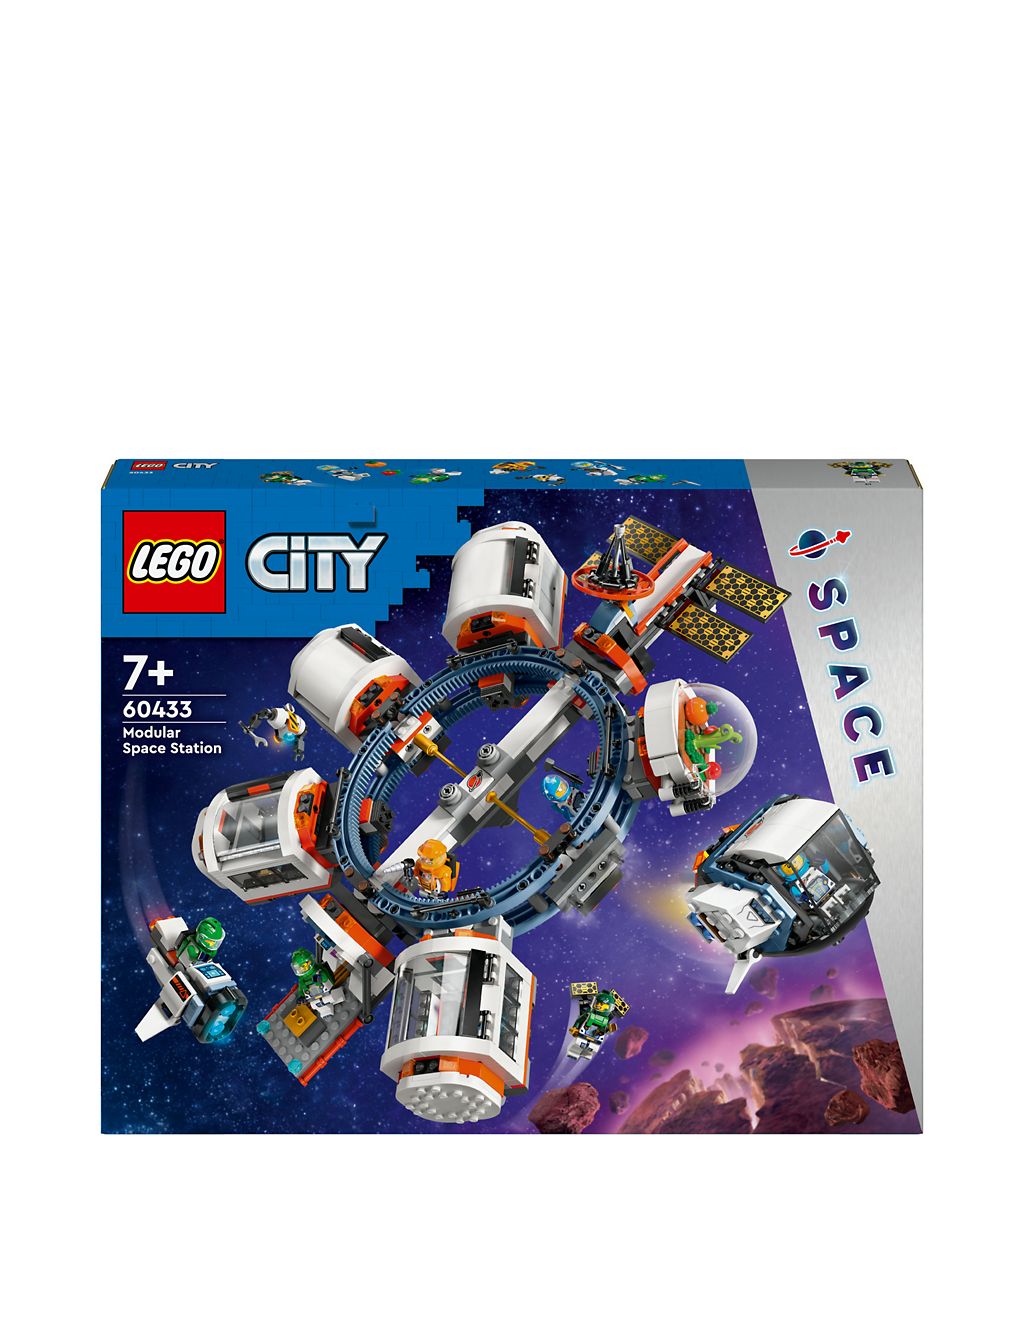 LEGO City Modular Space Station Building Toy 60433 (7+ Yrs) 1 of 7